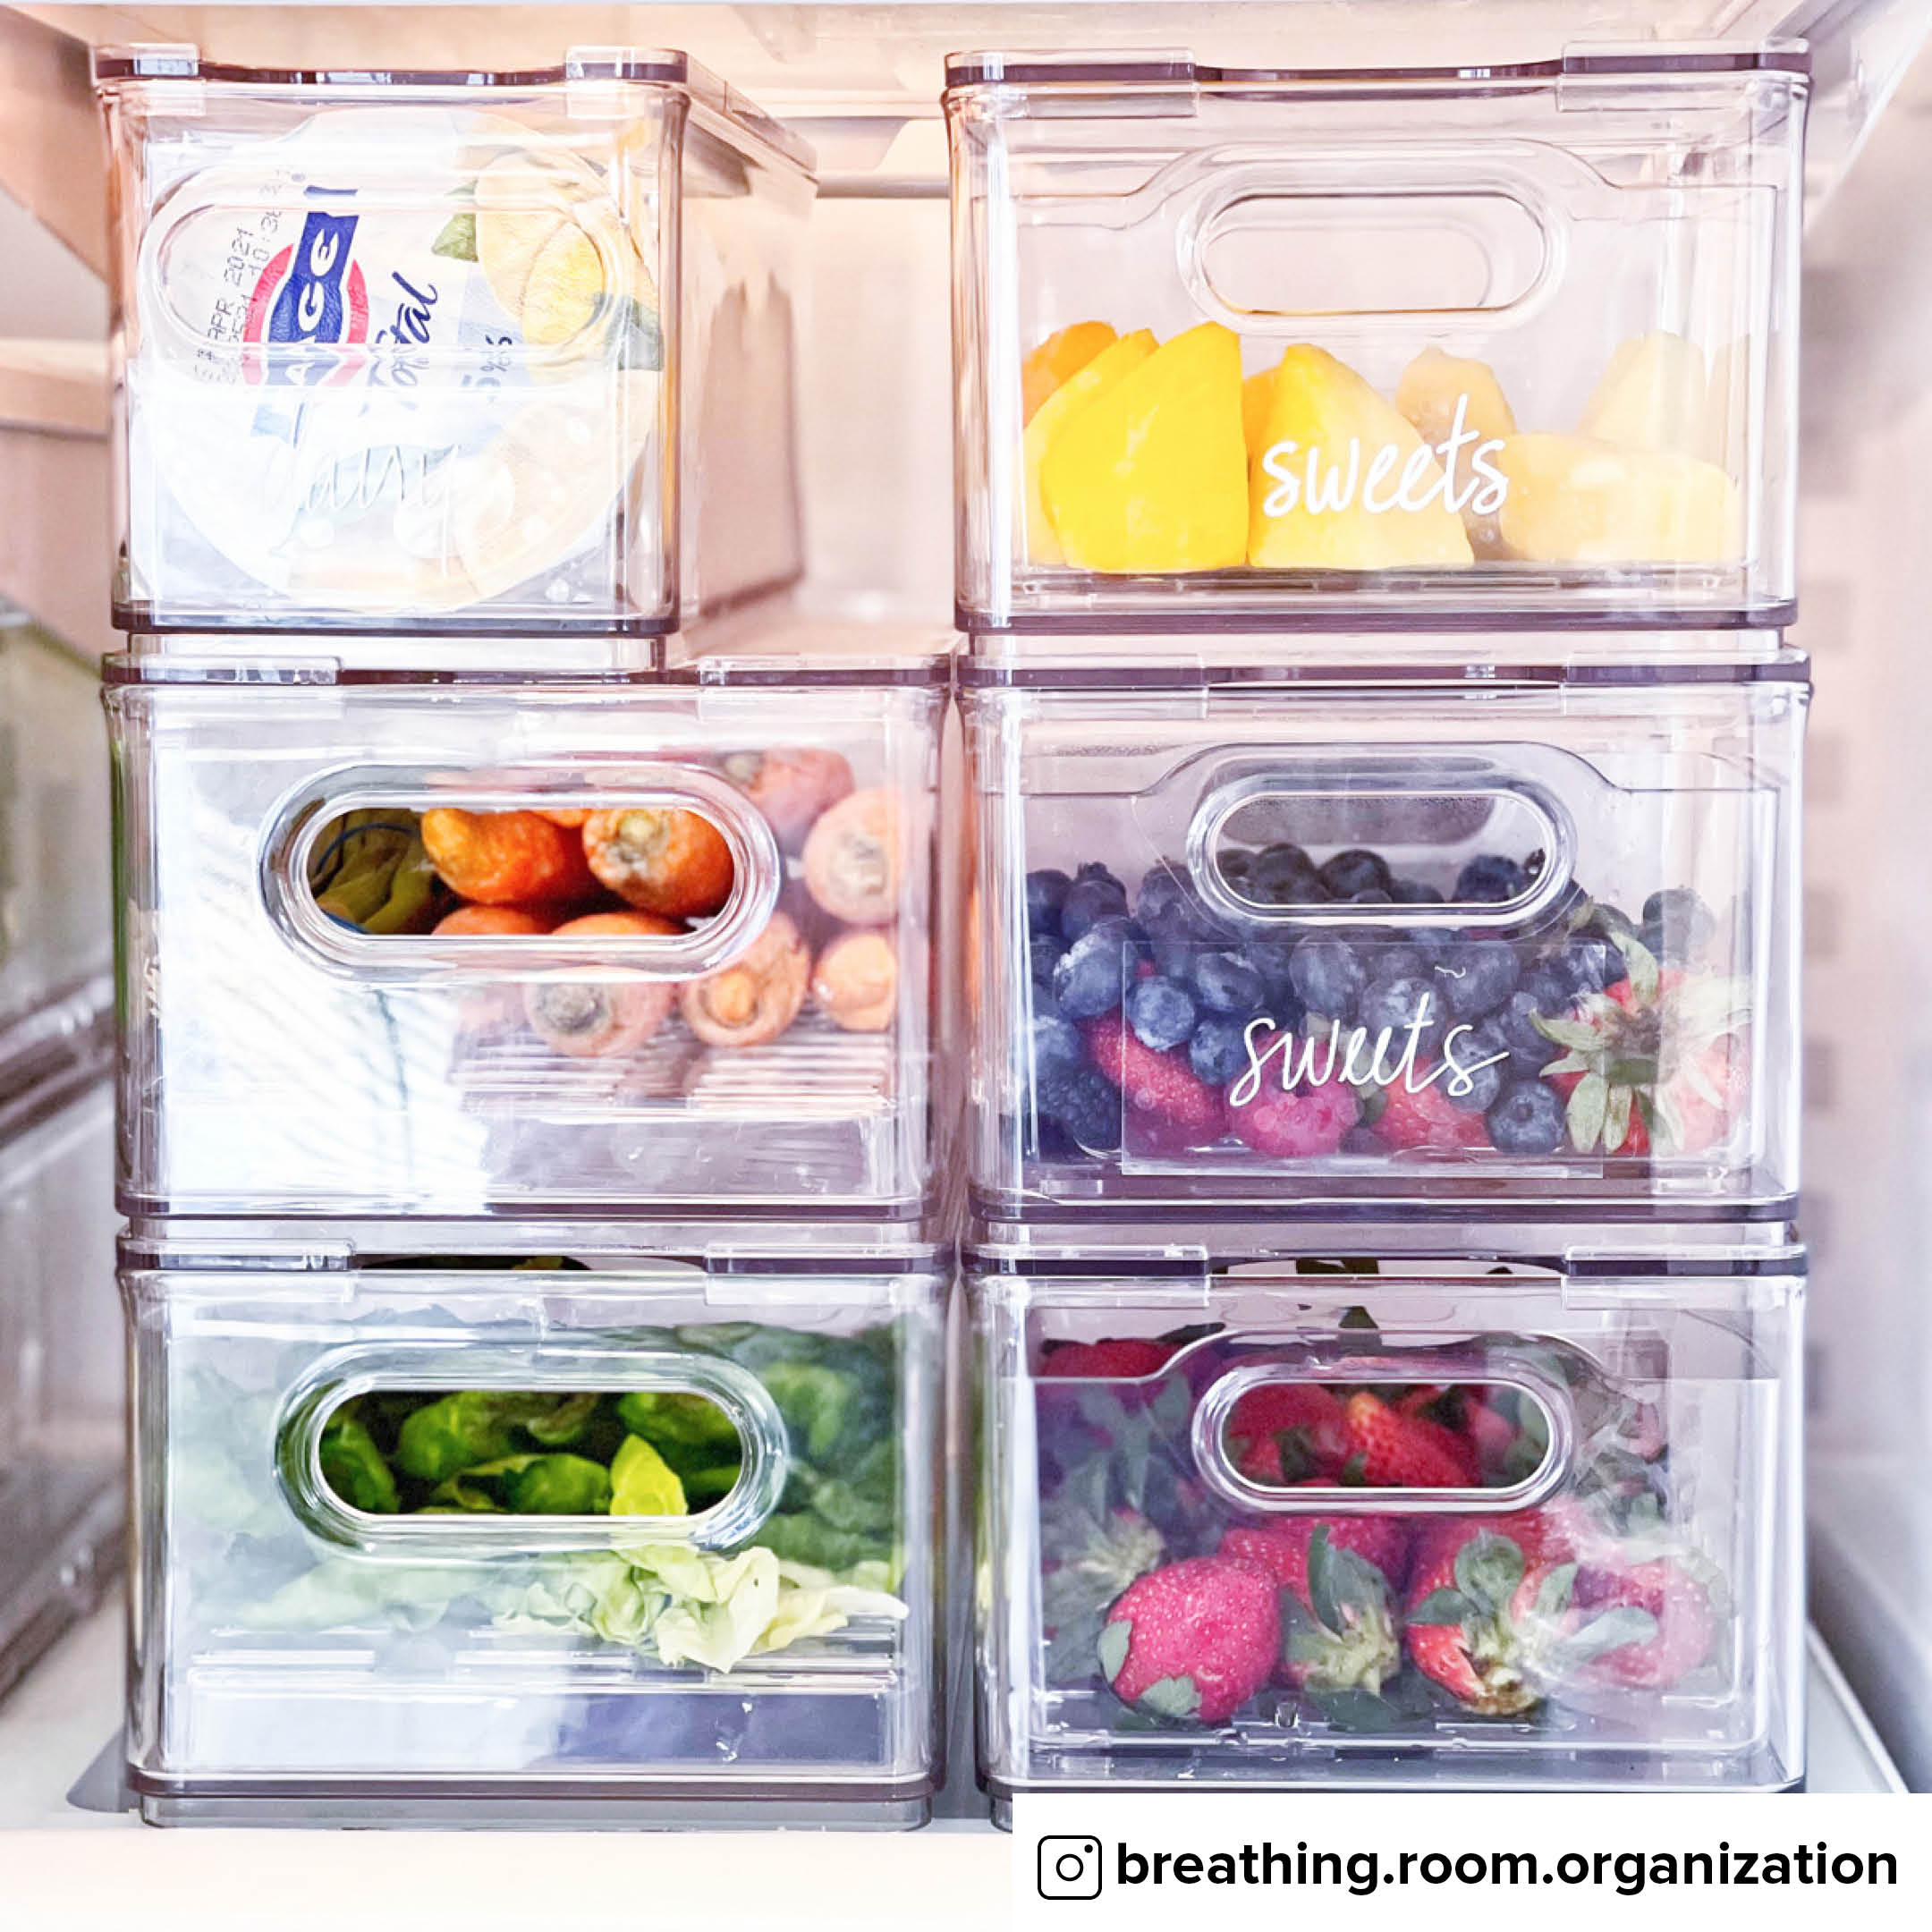 https://www.containerstore.com/catalogimages/412707/@breathing.room.organization_Photo-M.jpg